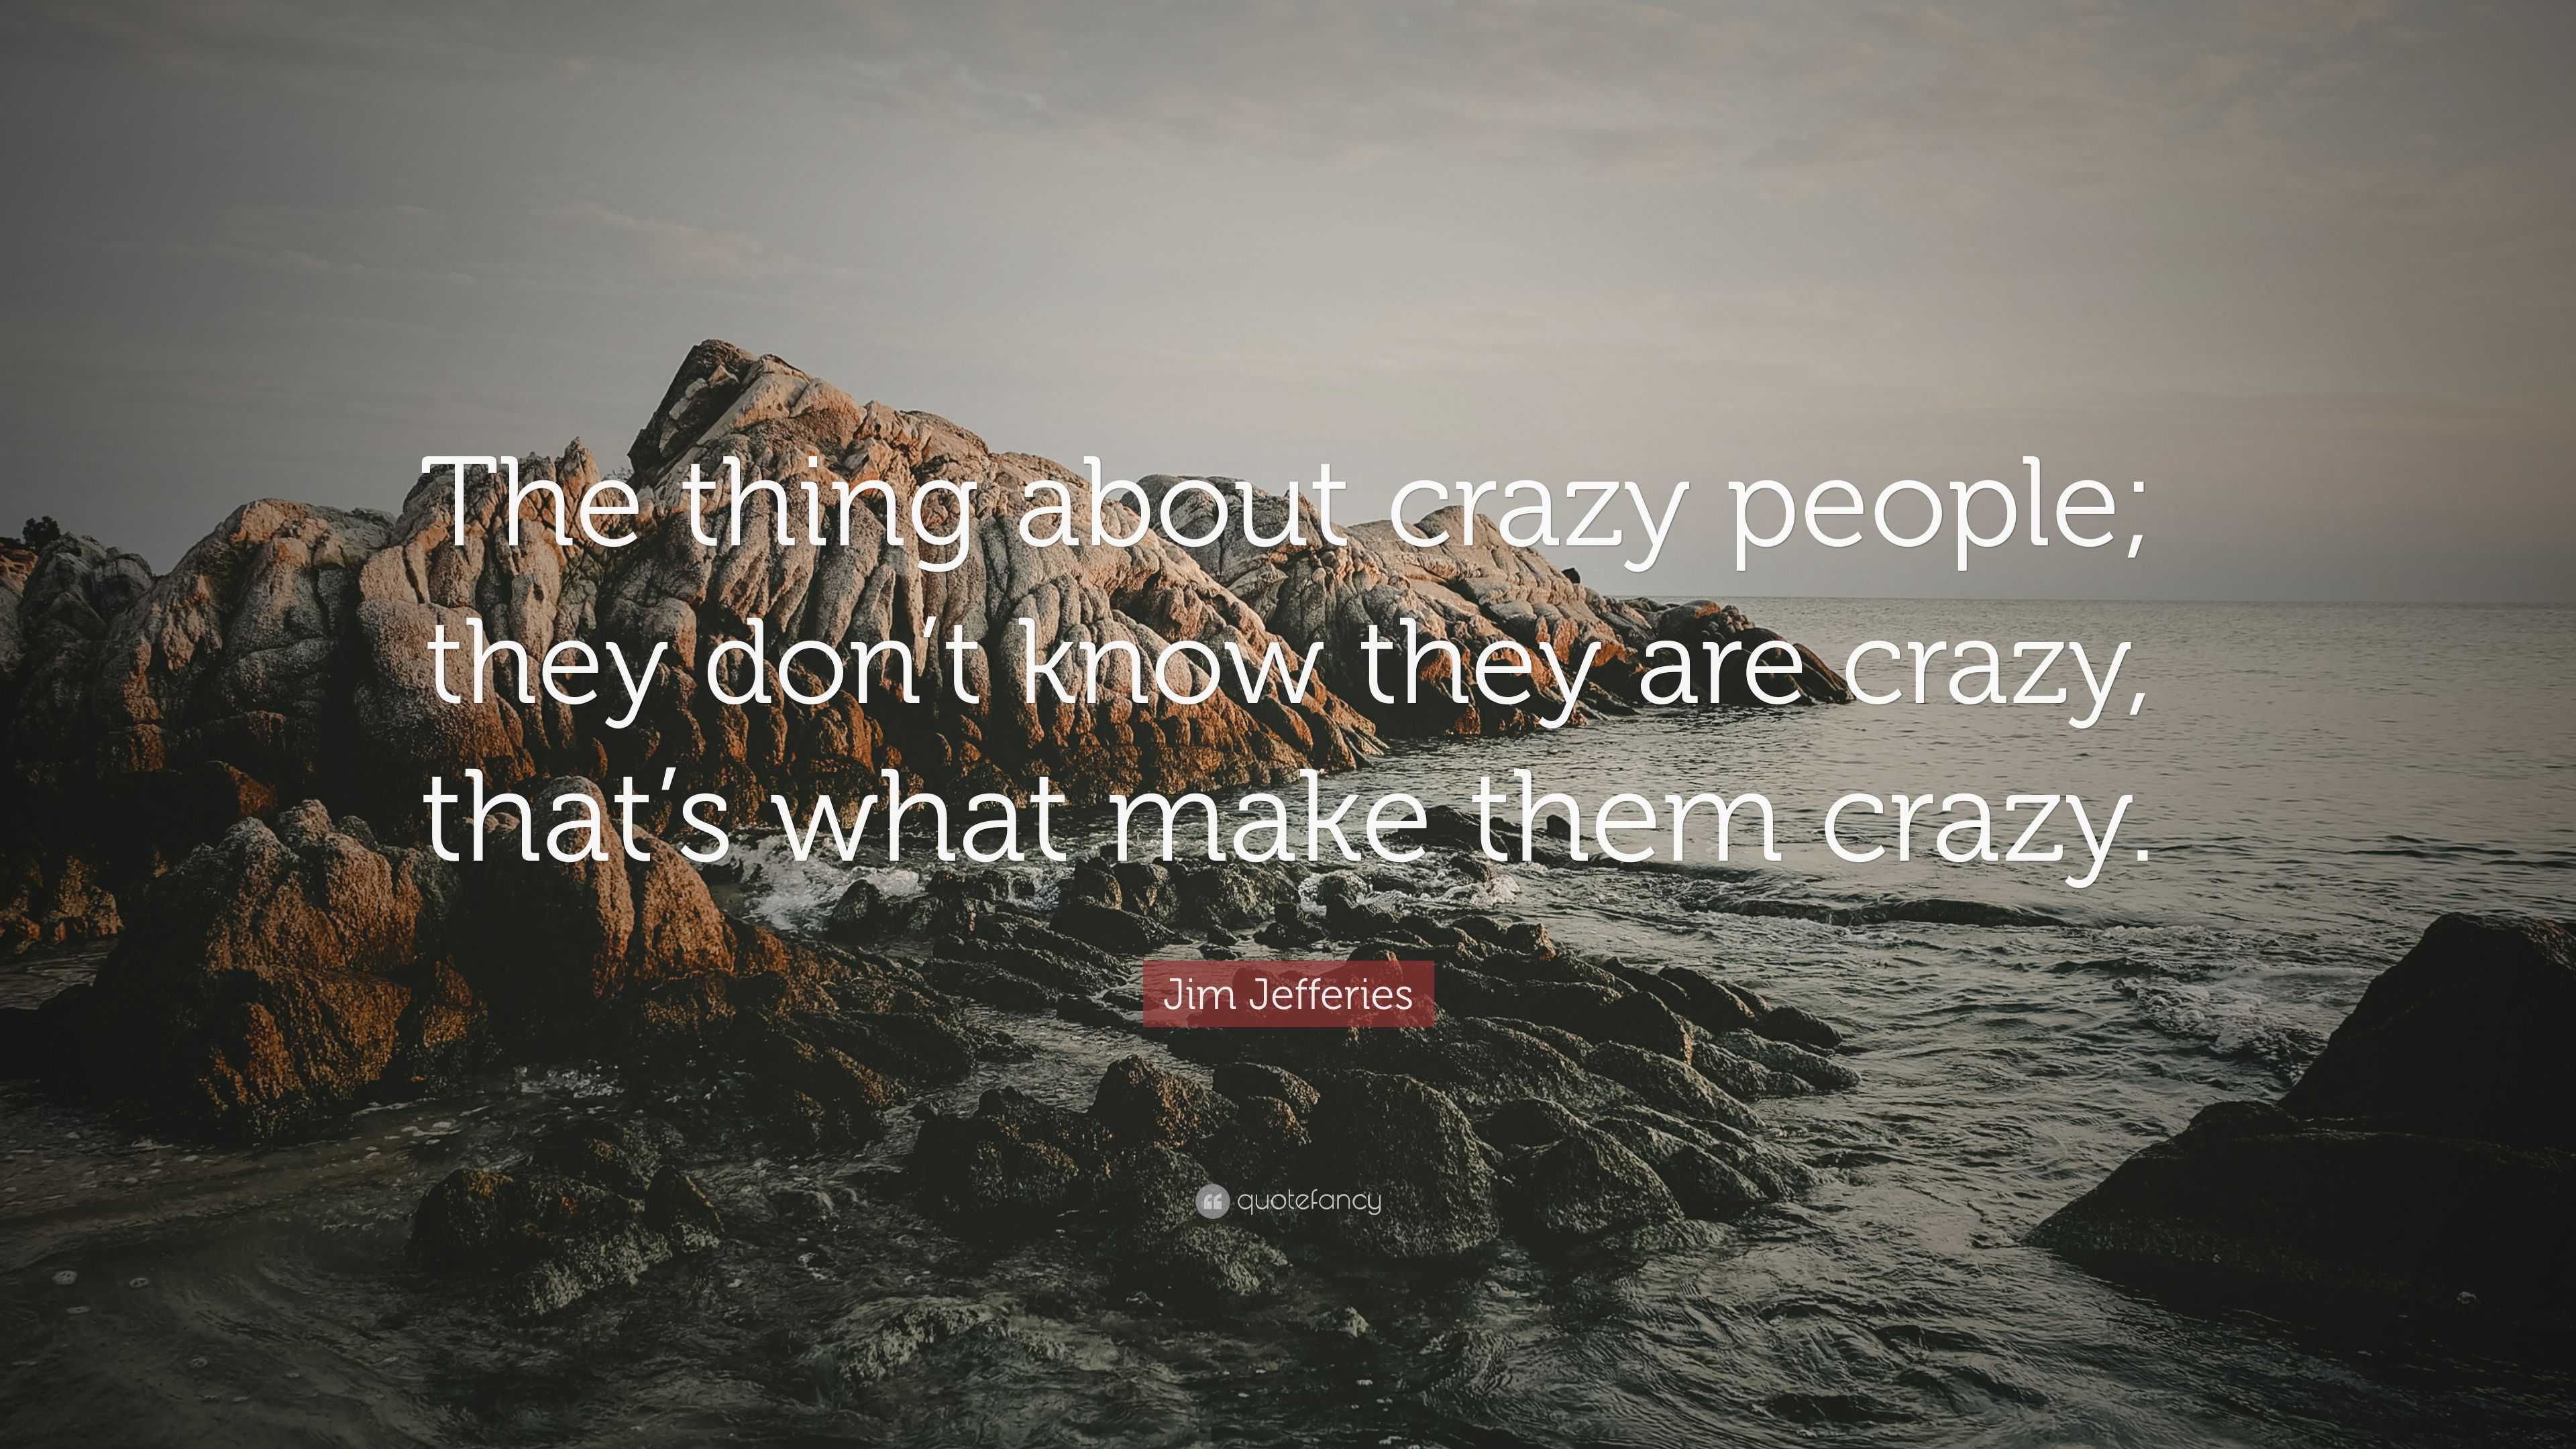 Jim Jefferies Quote: "The thing about crazy people; they ...